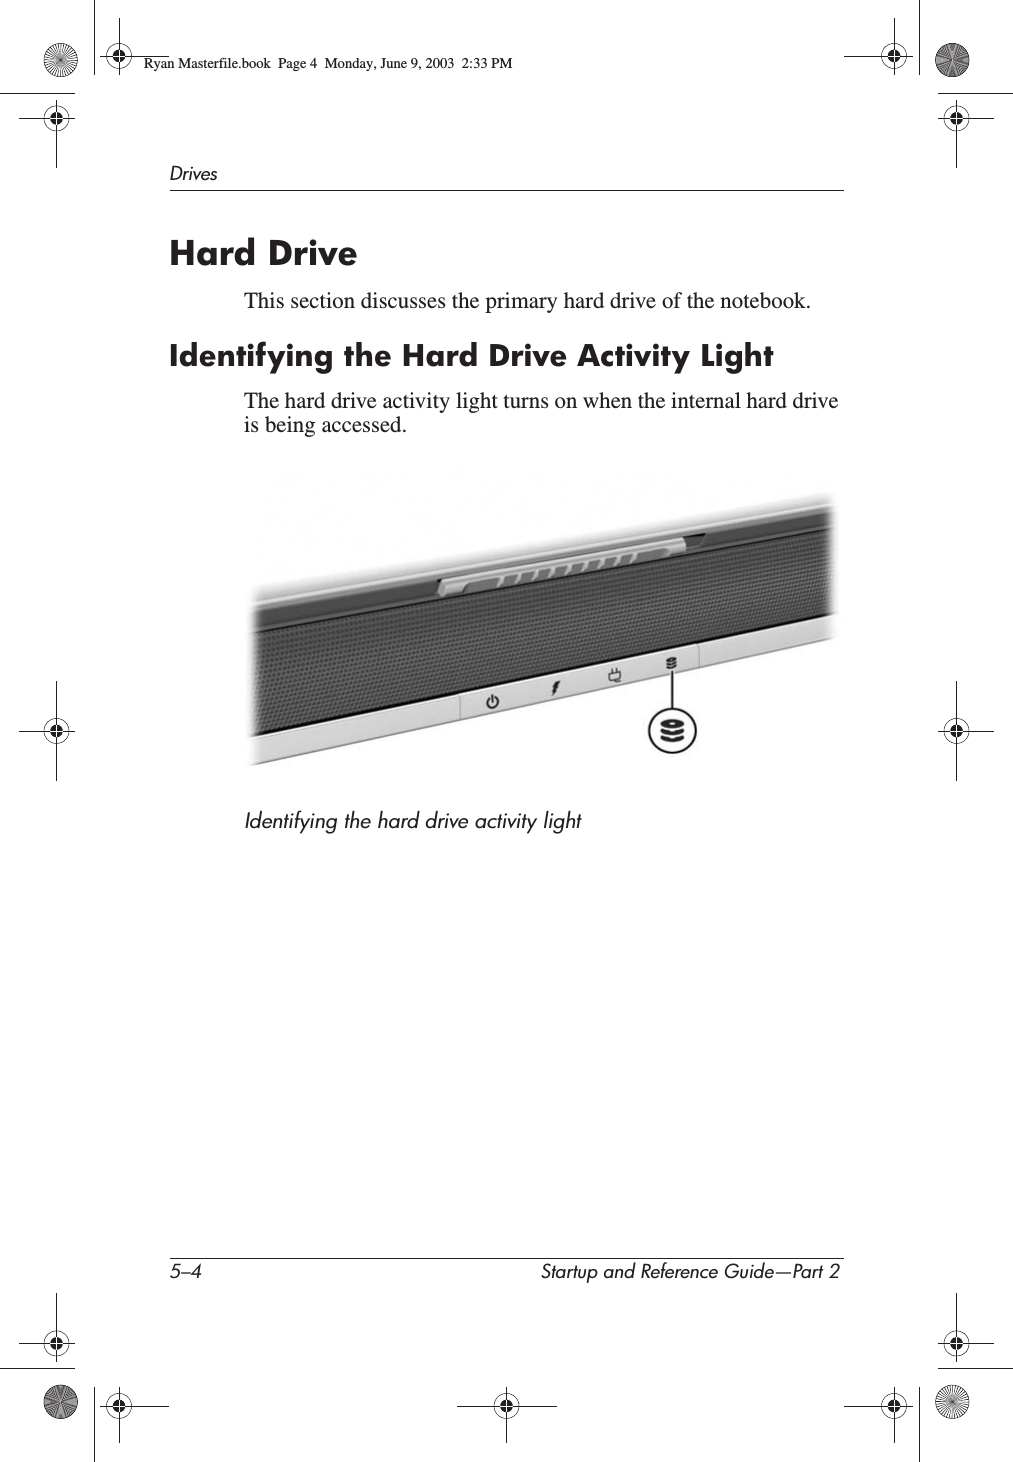 5–4 Startup and Reference Guide—Part 2DrivesHard DriveThis section discusses the primary hard drive of the notebook.Identifying the Hard Drive Activity LightThe hard drive activity light turns on when the internal hard drive is being accessed.Identifying the hard drive activity lightRyan Masterfile.book  Page 4  Monday, June 9, 2003  2:33 PM